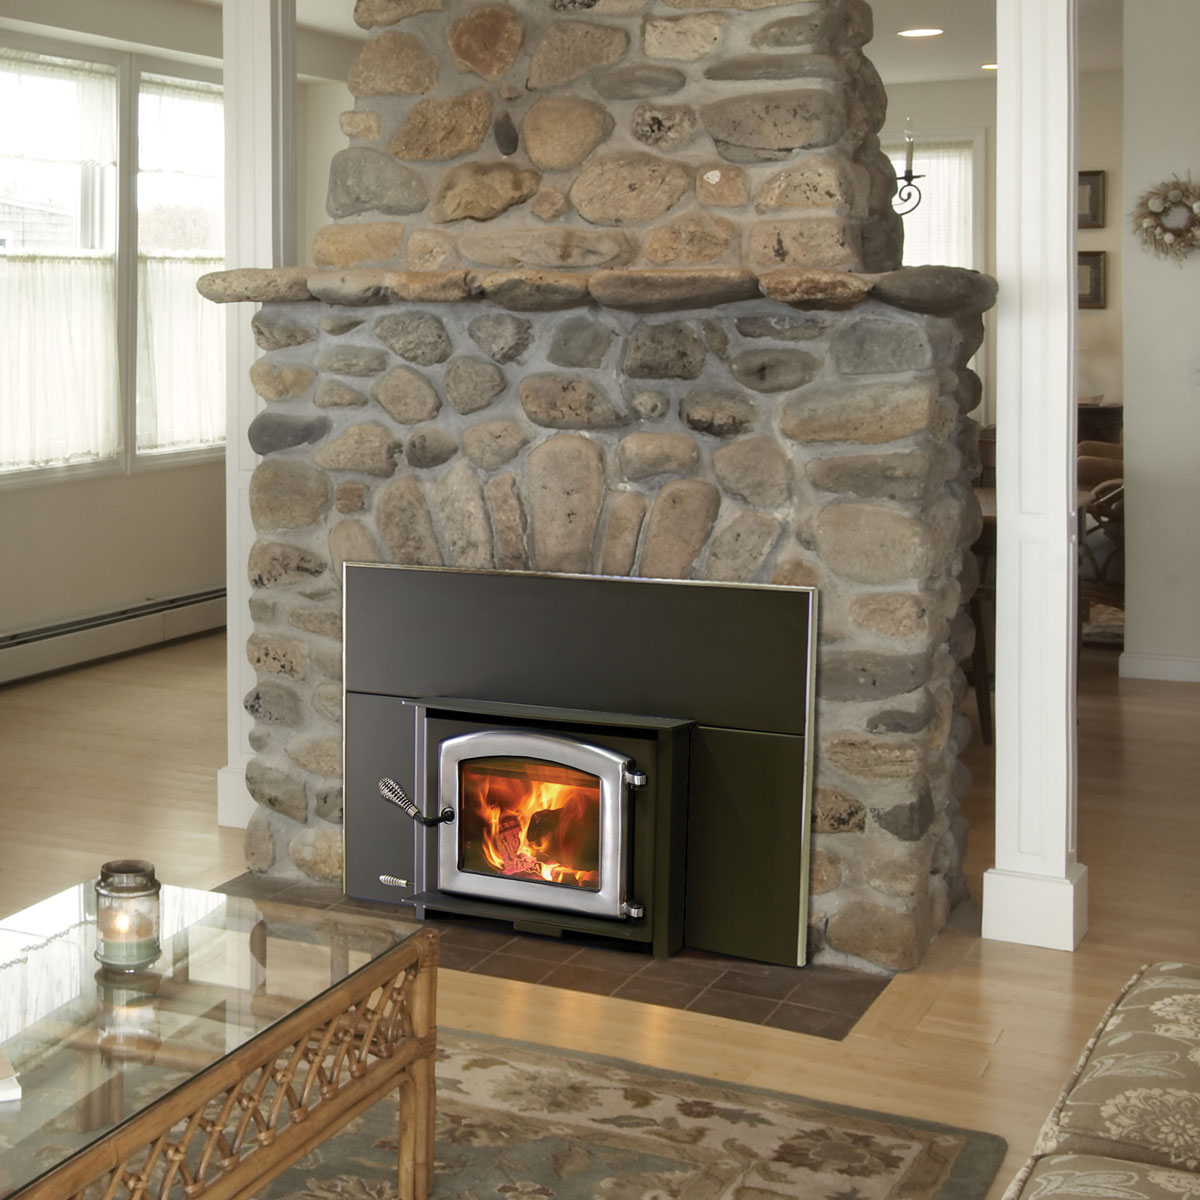 Kuma Aspen wood fireplace insert with pewter door, made in the USA